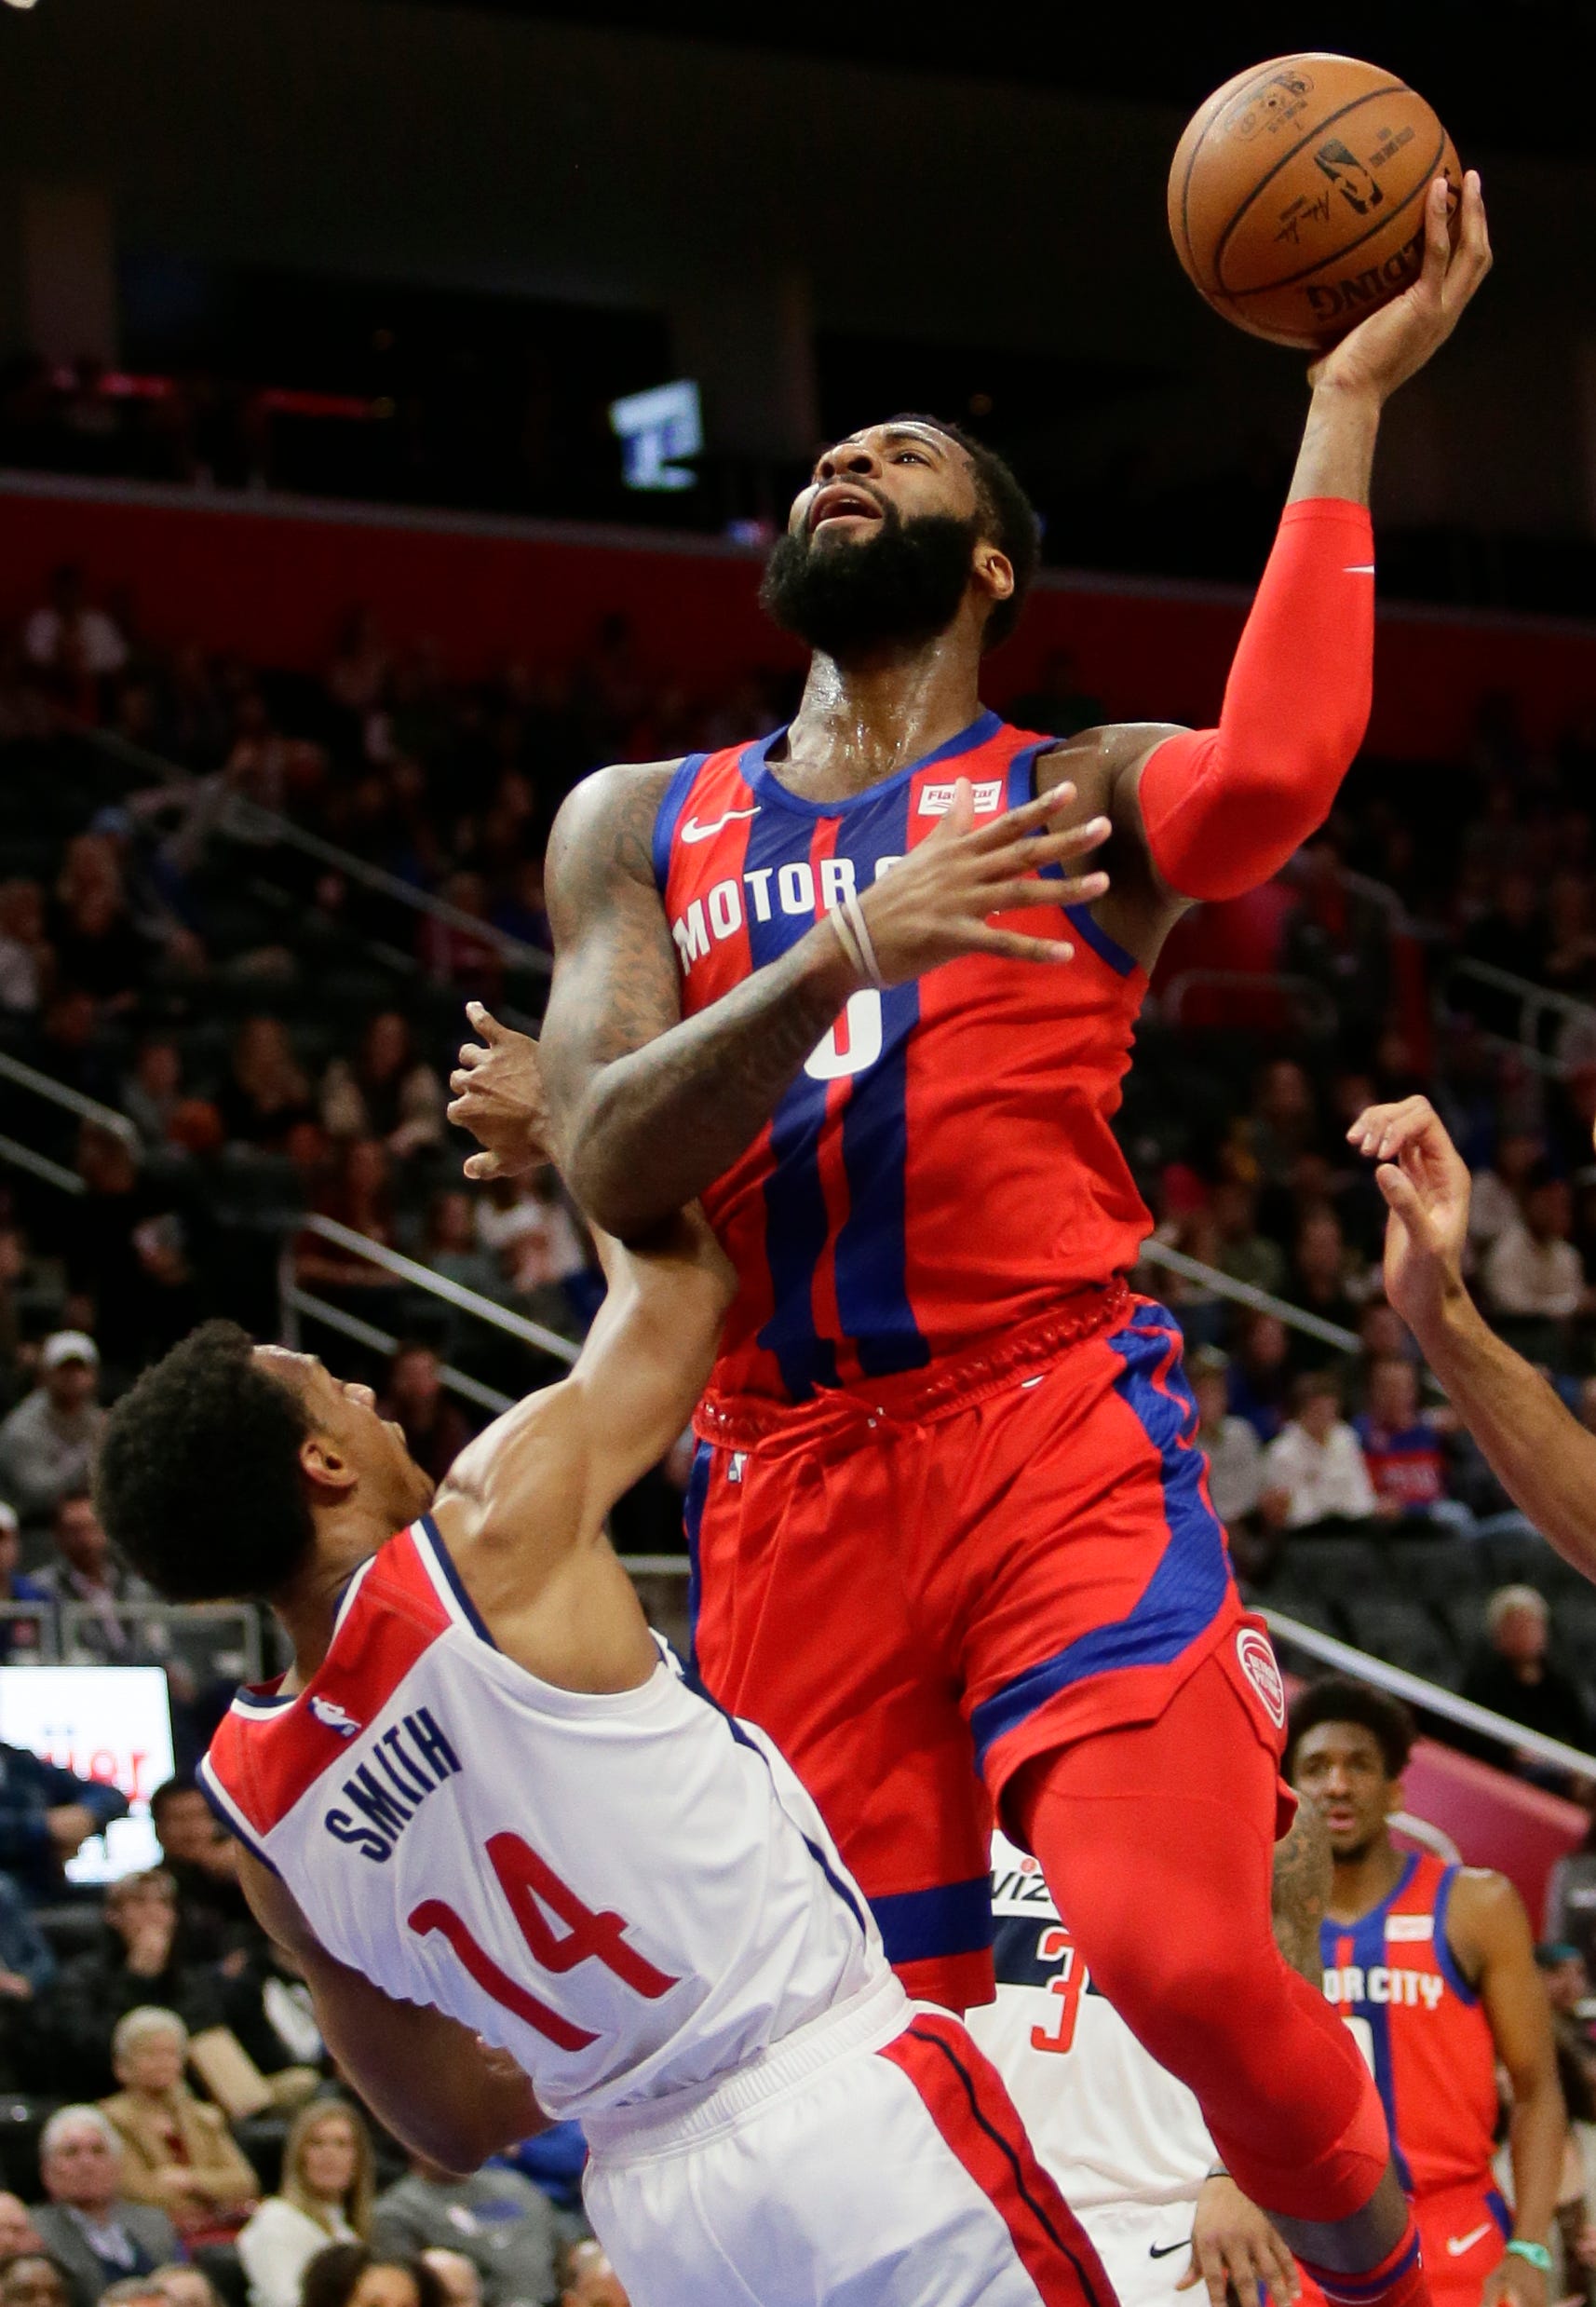 Detroit Pistons center Andre Drummond (0) shoots against Washington Wizards guard Ish Smith (14) during the first half on Thursday, Dec. 26, 2019, in Detroit.